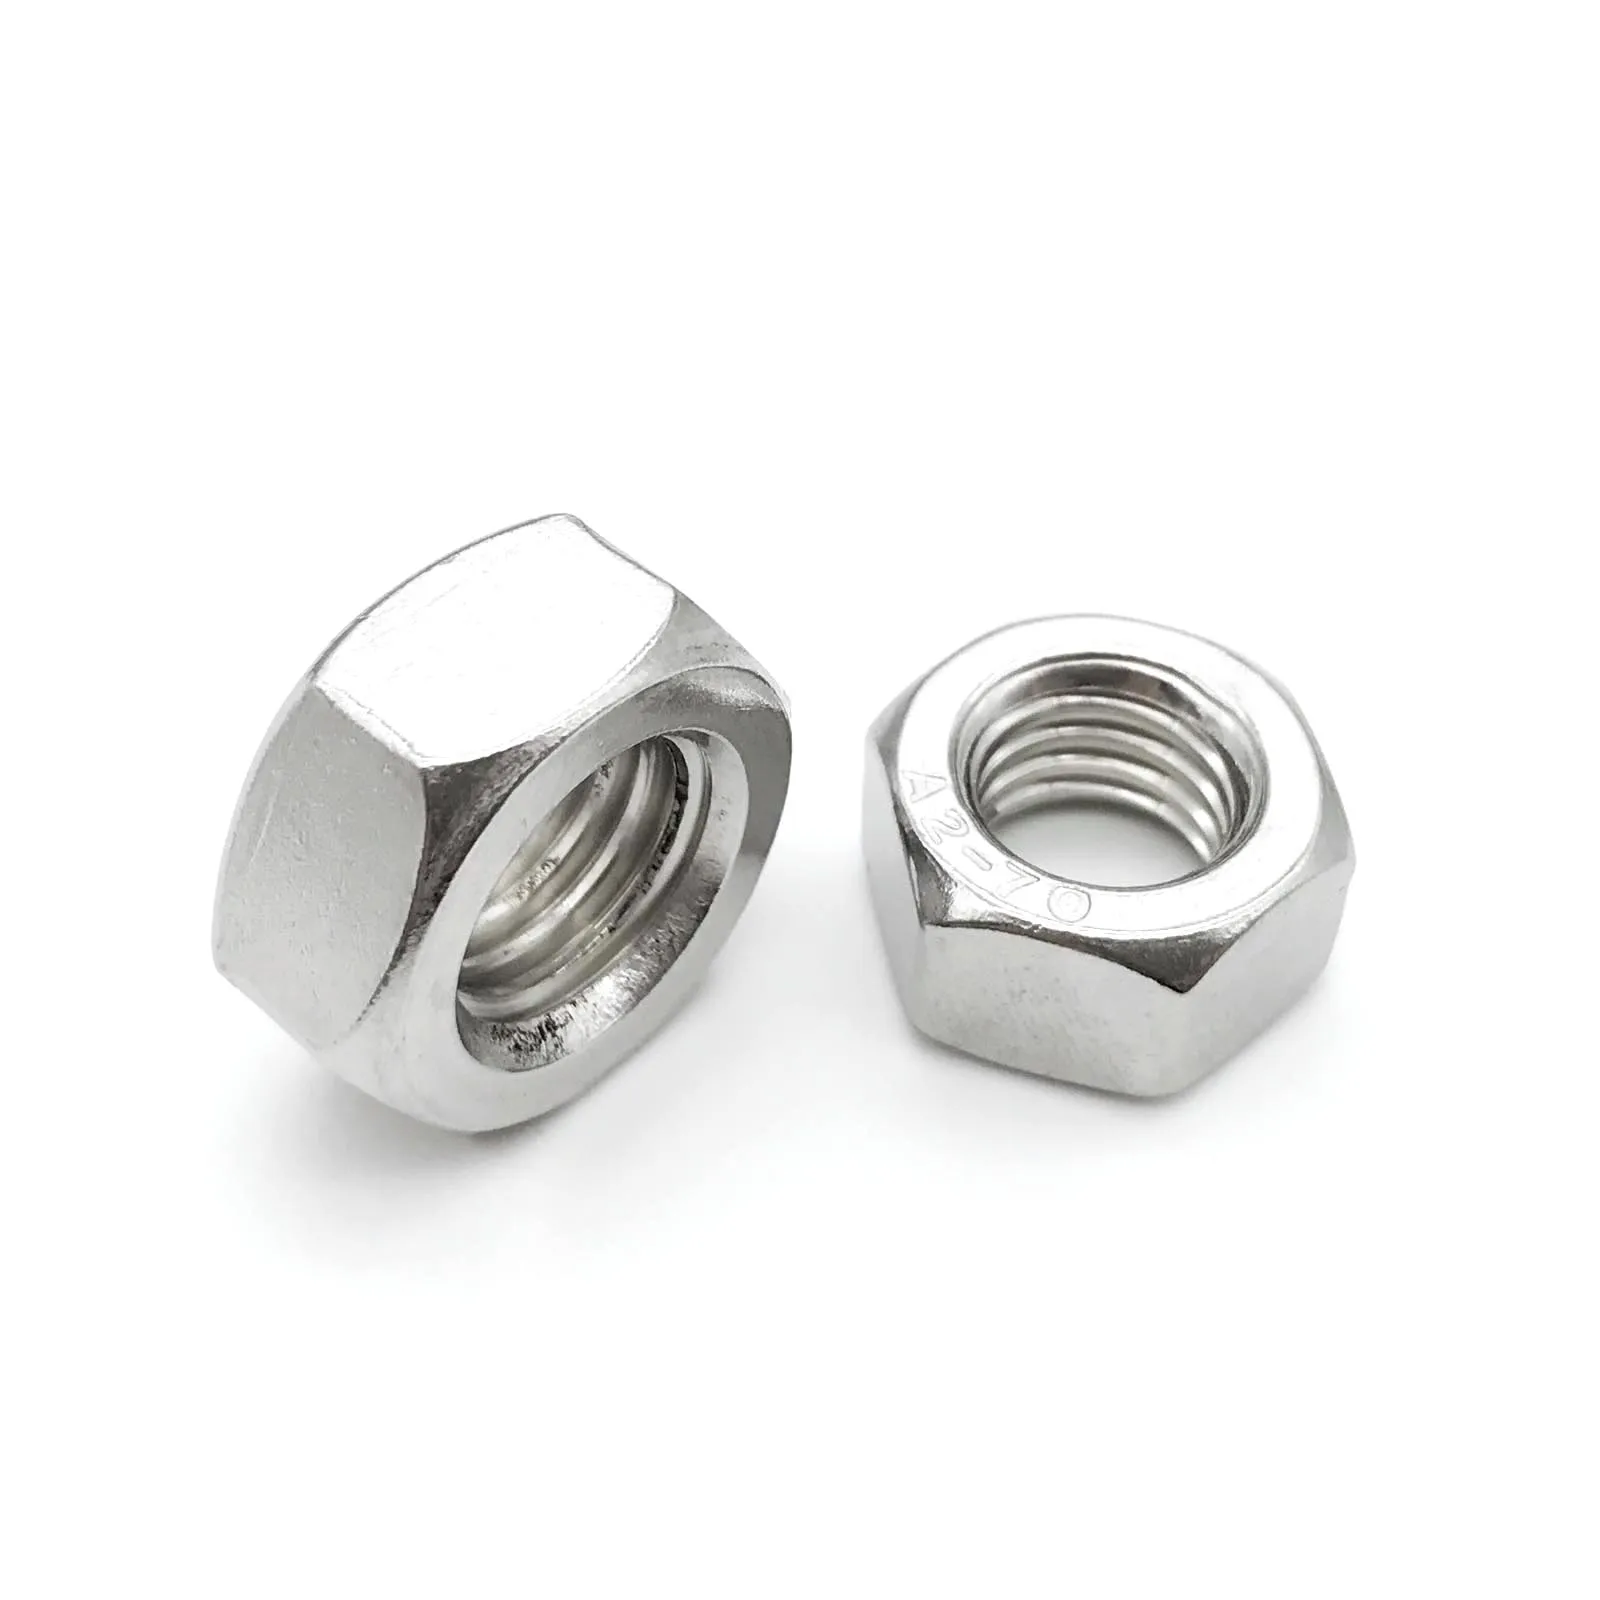 M6 HEX FULL NUTS A4 316 MARINE GRADE-STAINLESS STEEL X 50 pK VAT INCLUDED 